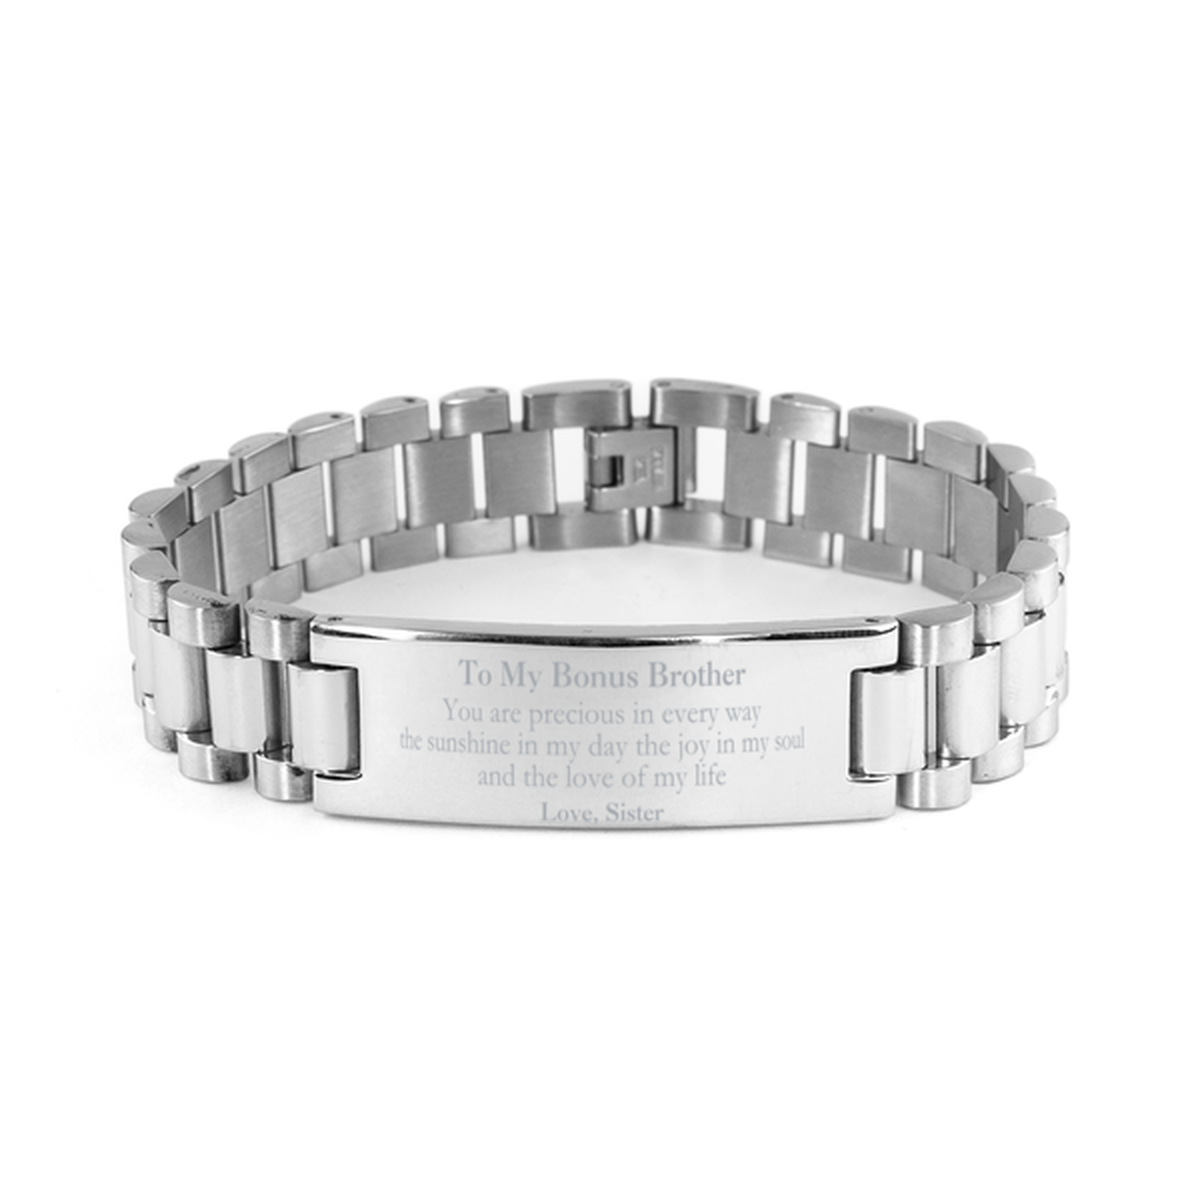 Graduation Gifts for Bonus Brother Ladder Stainless Steel Bracelet Present from Sister, Christmas Bonus Brother Birthday Gifts Bonus Brother You are precious in every way the sunshine in my day. Love, Sister